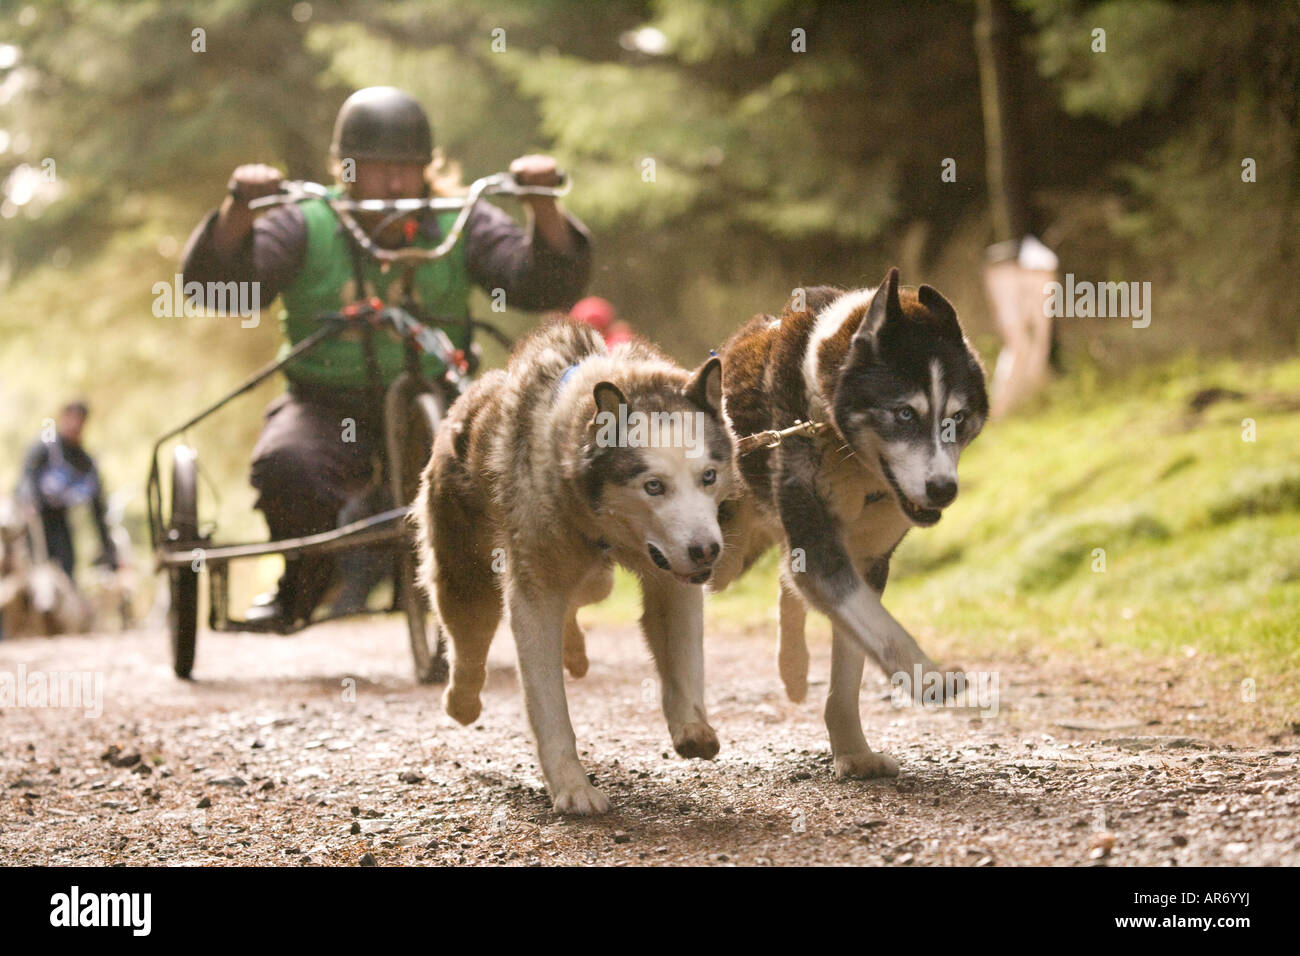 Dog Sport Scotland Husky Huskies teamwork two dog sled racing in Ae Forest Dumfries and Galloway UK Stock Photo